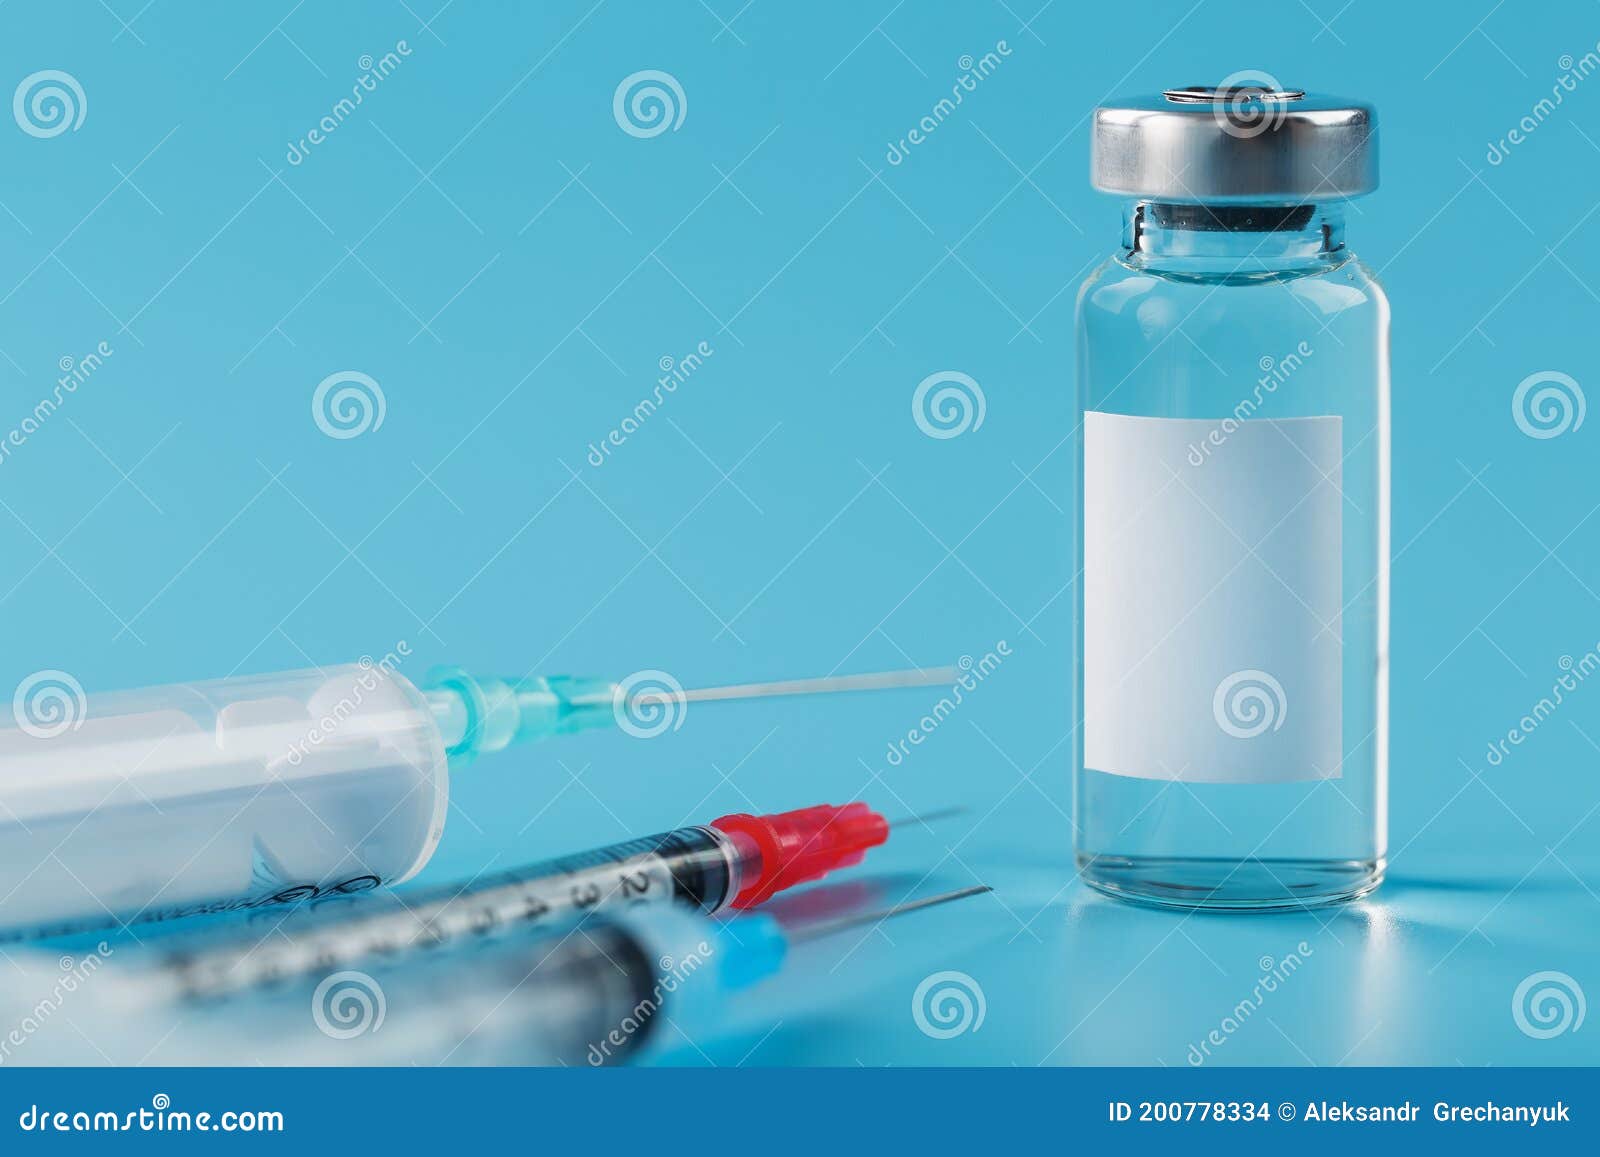 vials of vaccine and syringes in a row on a blue background close-up